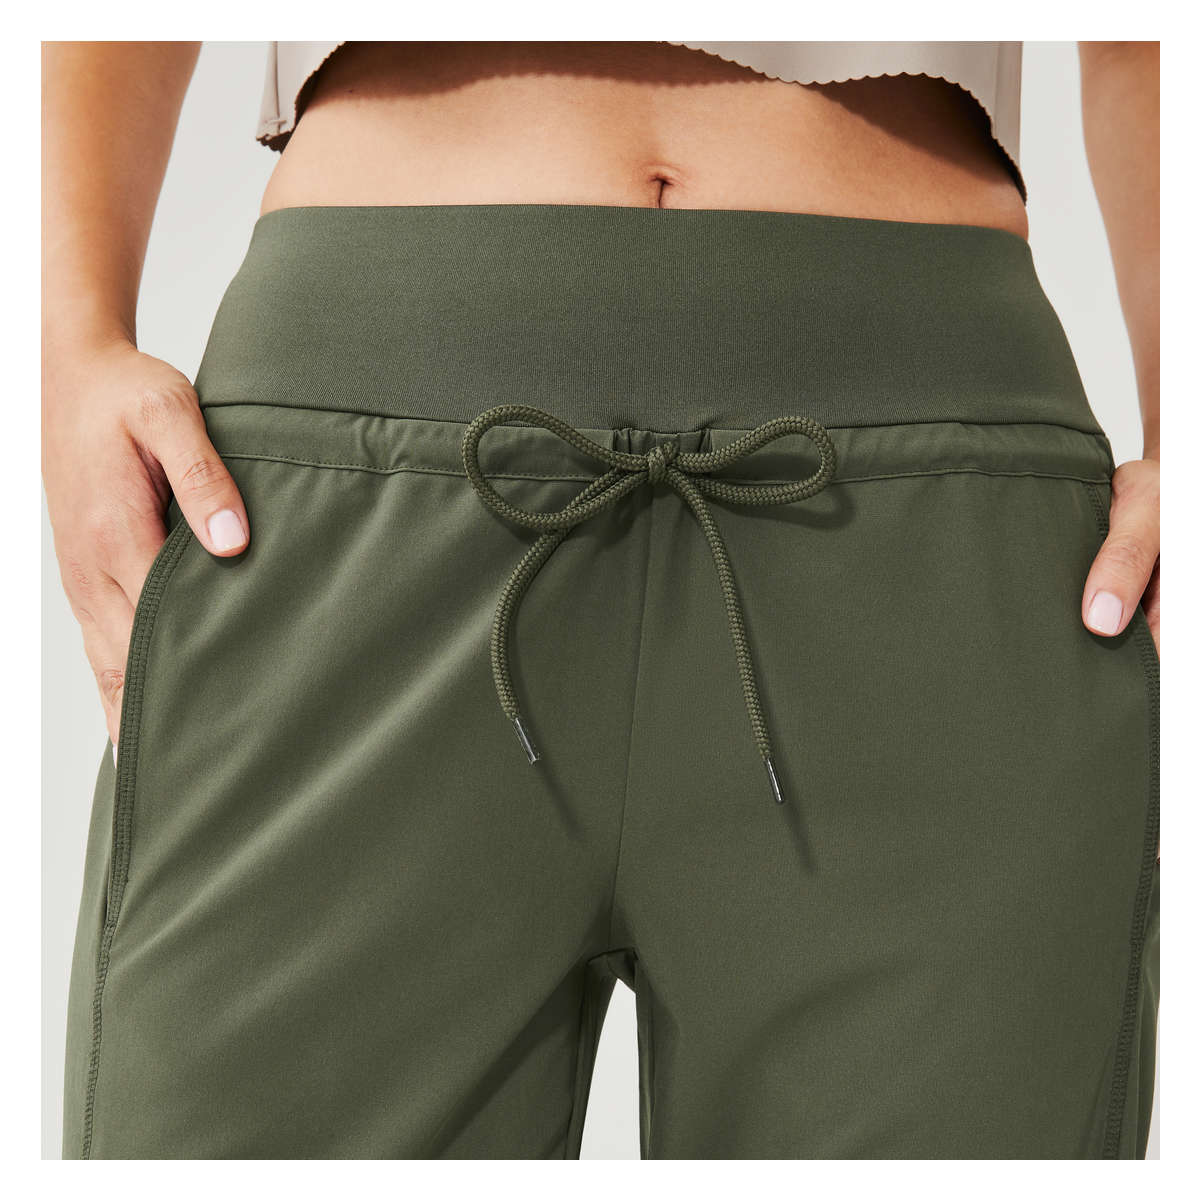 City Jogger in Army Green from Joe Fresh